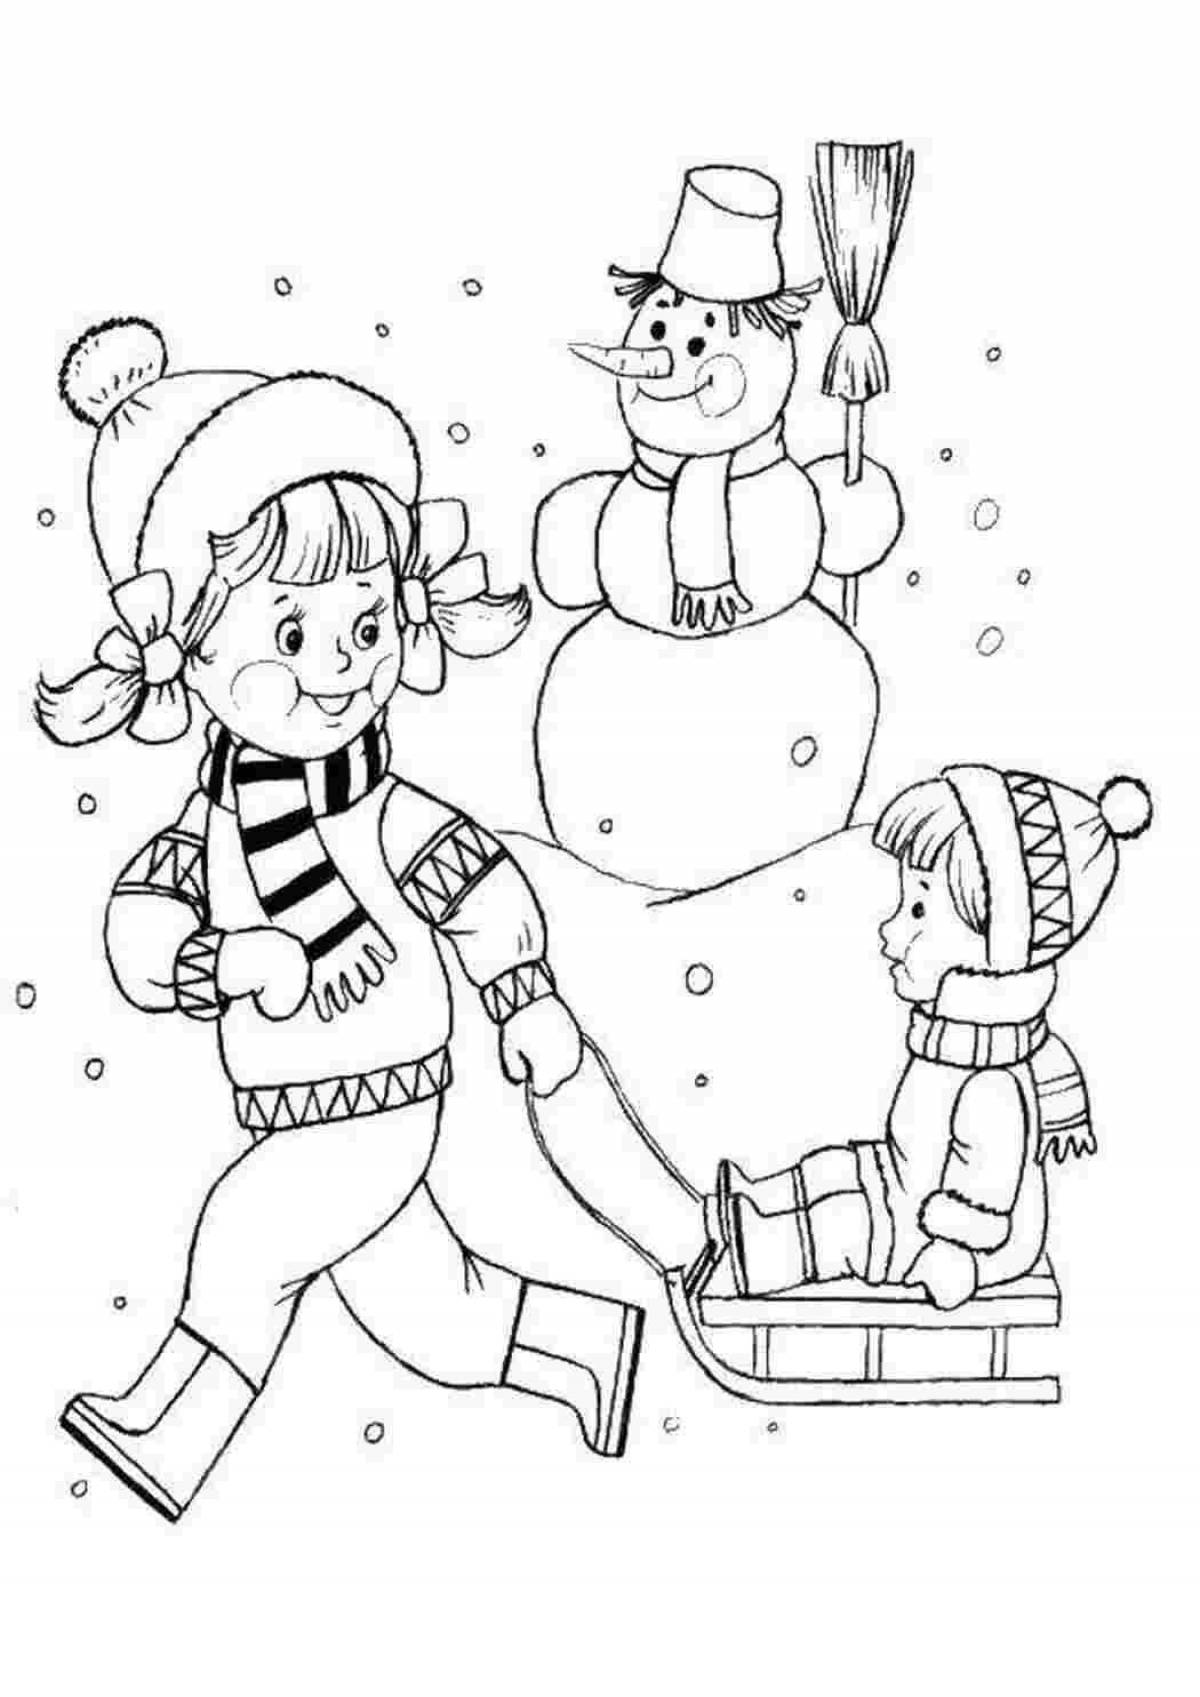 Wonderful winter coloring book for 4-5 year olds